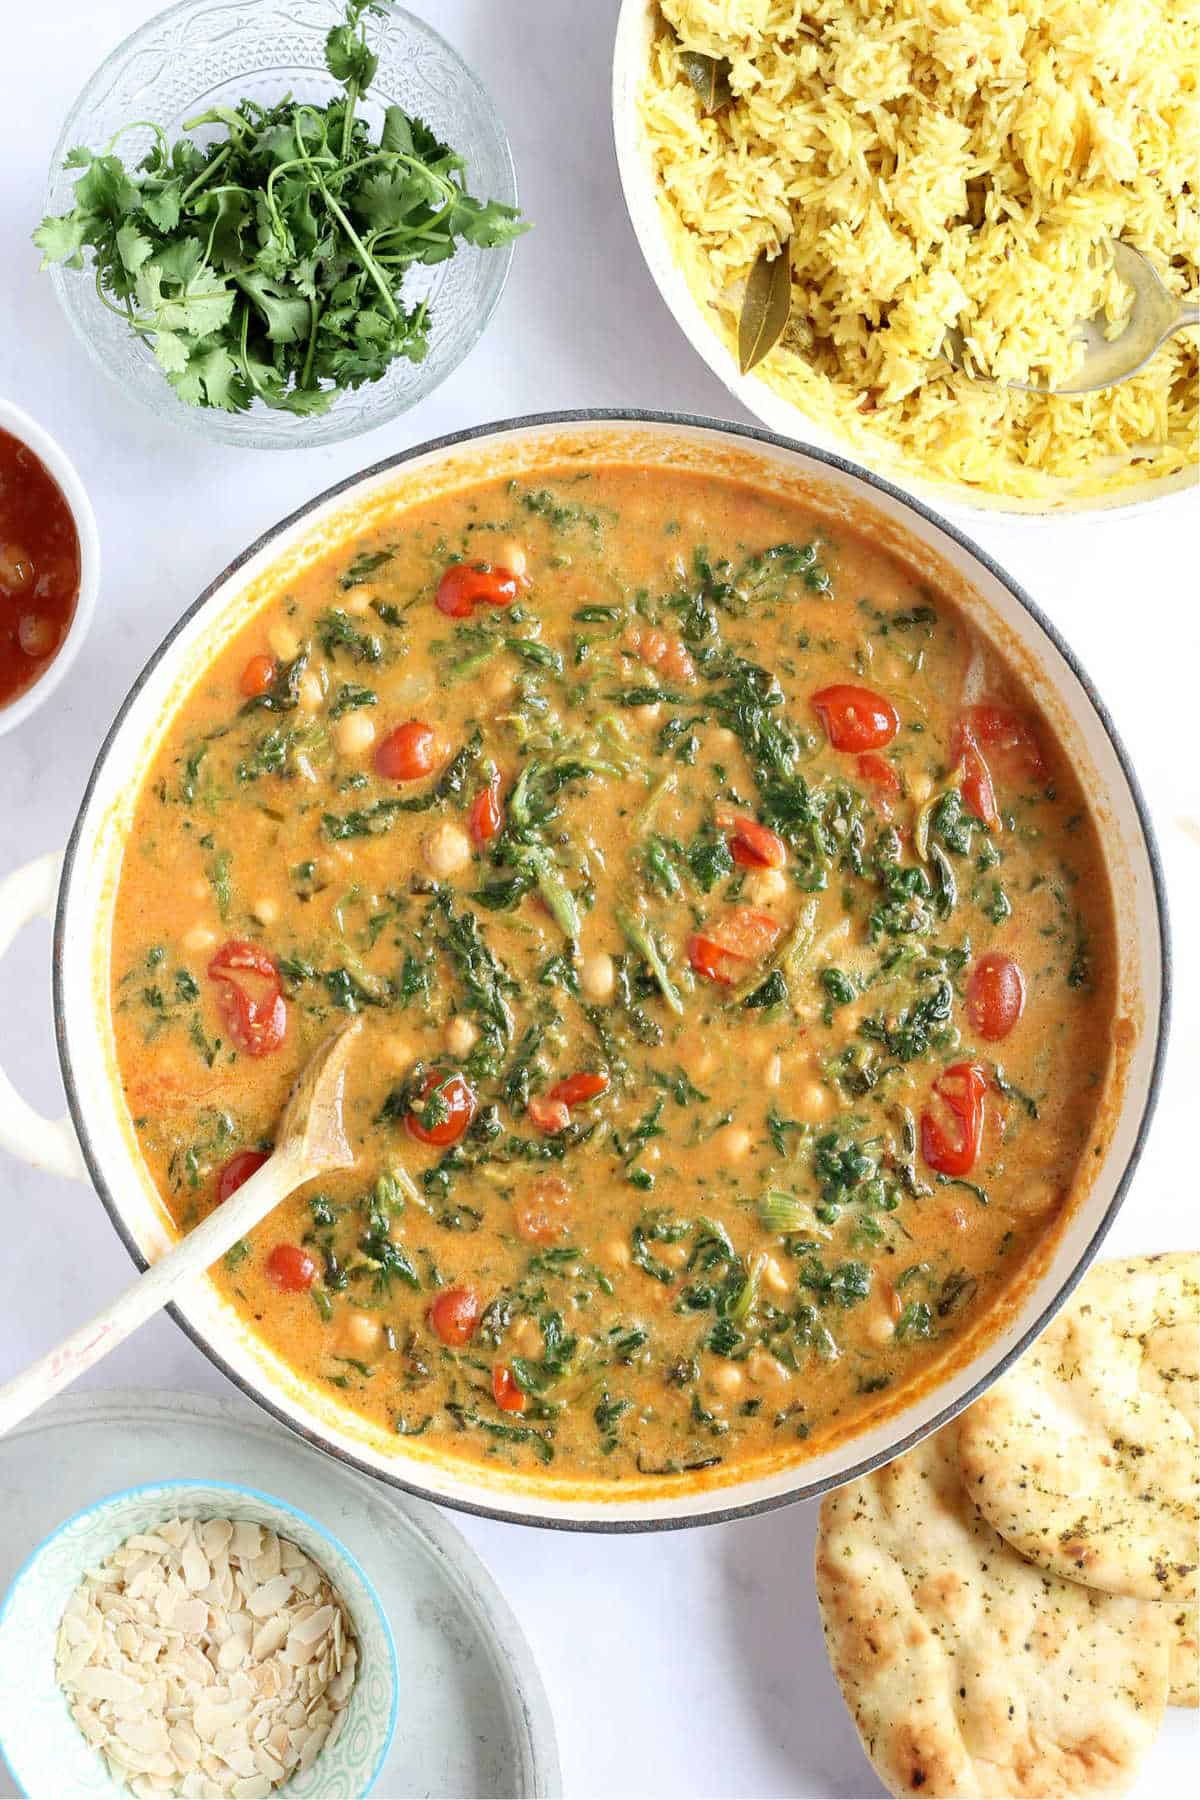 A pan of vegan curry with naan breads and rice.